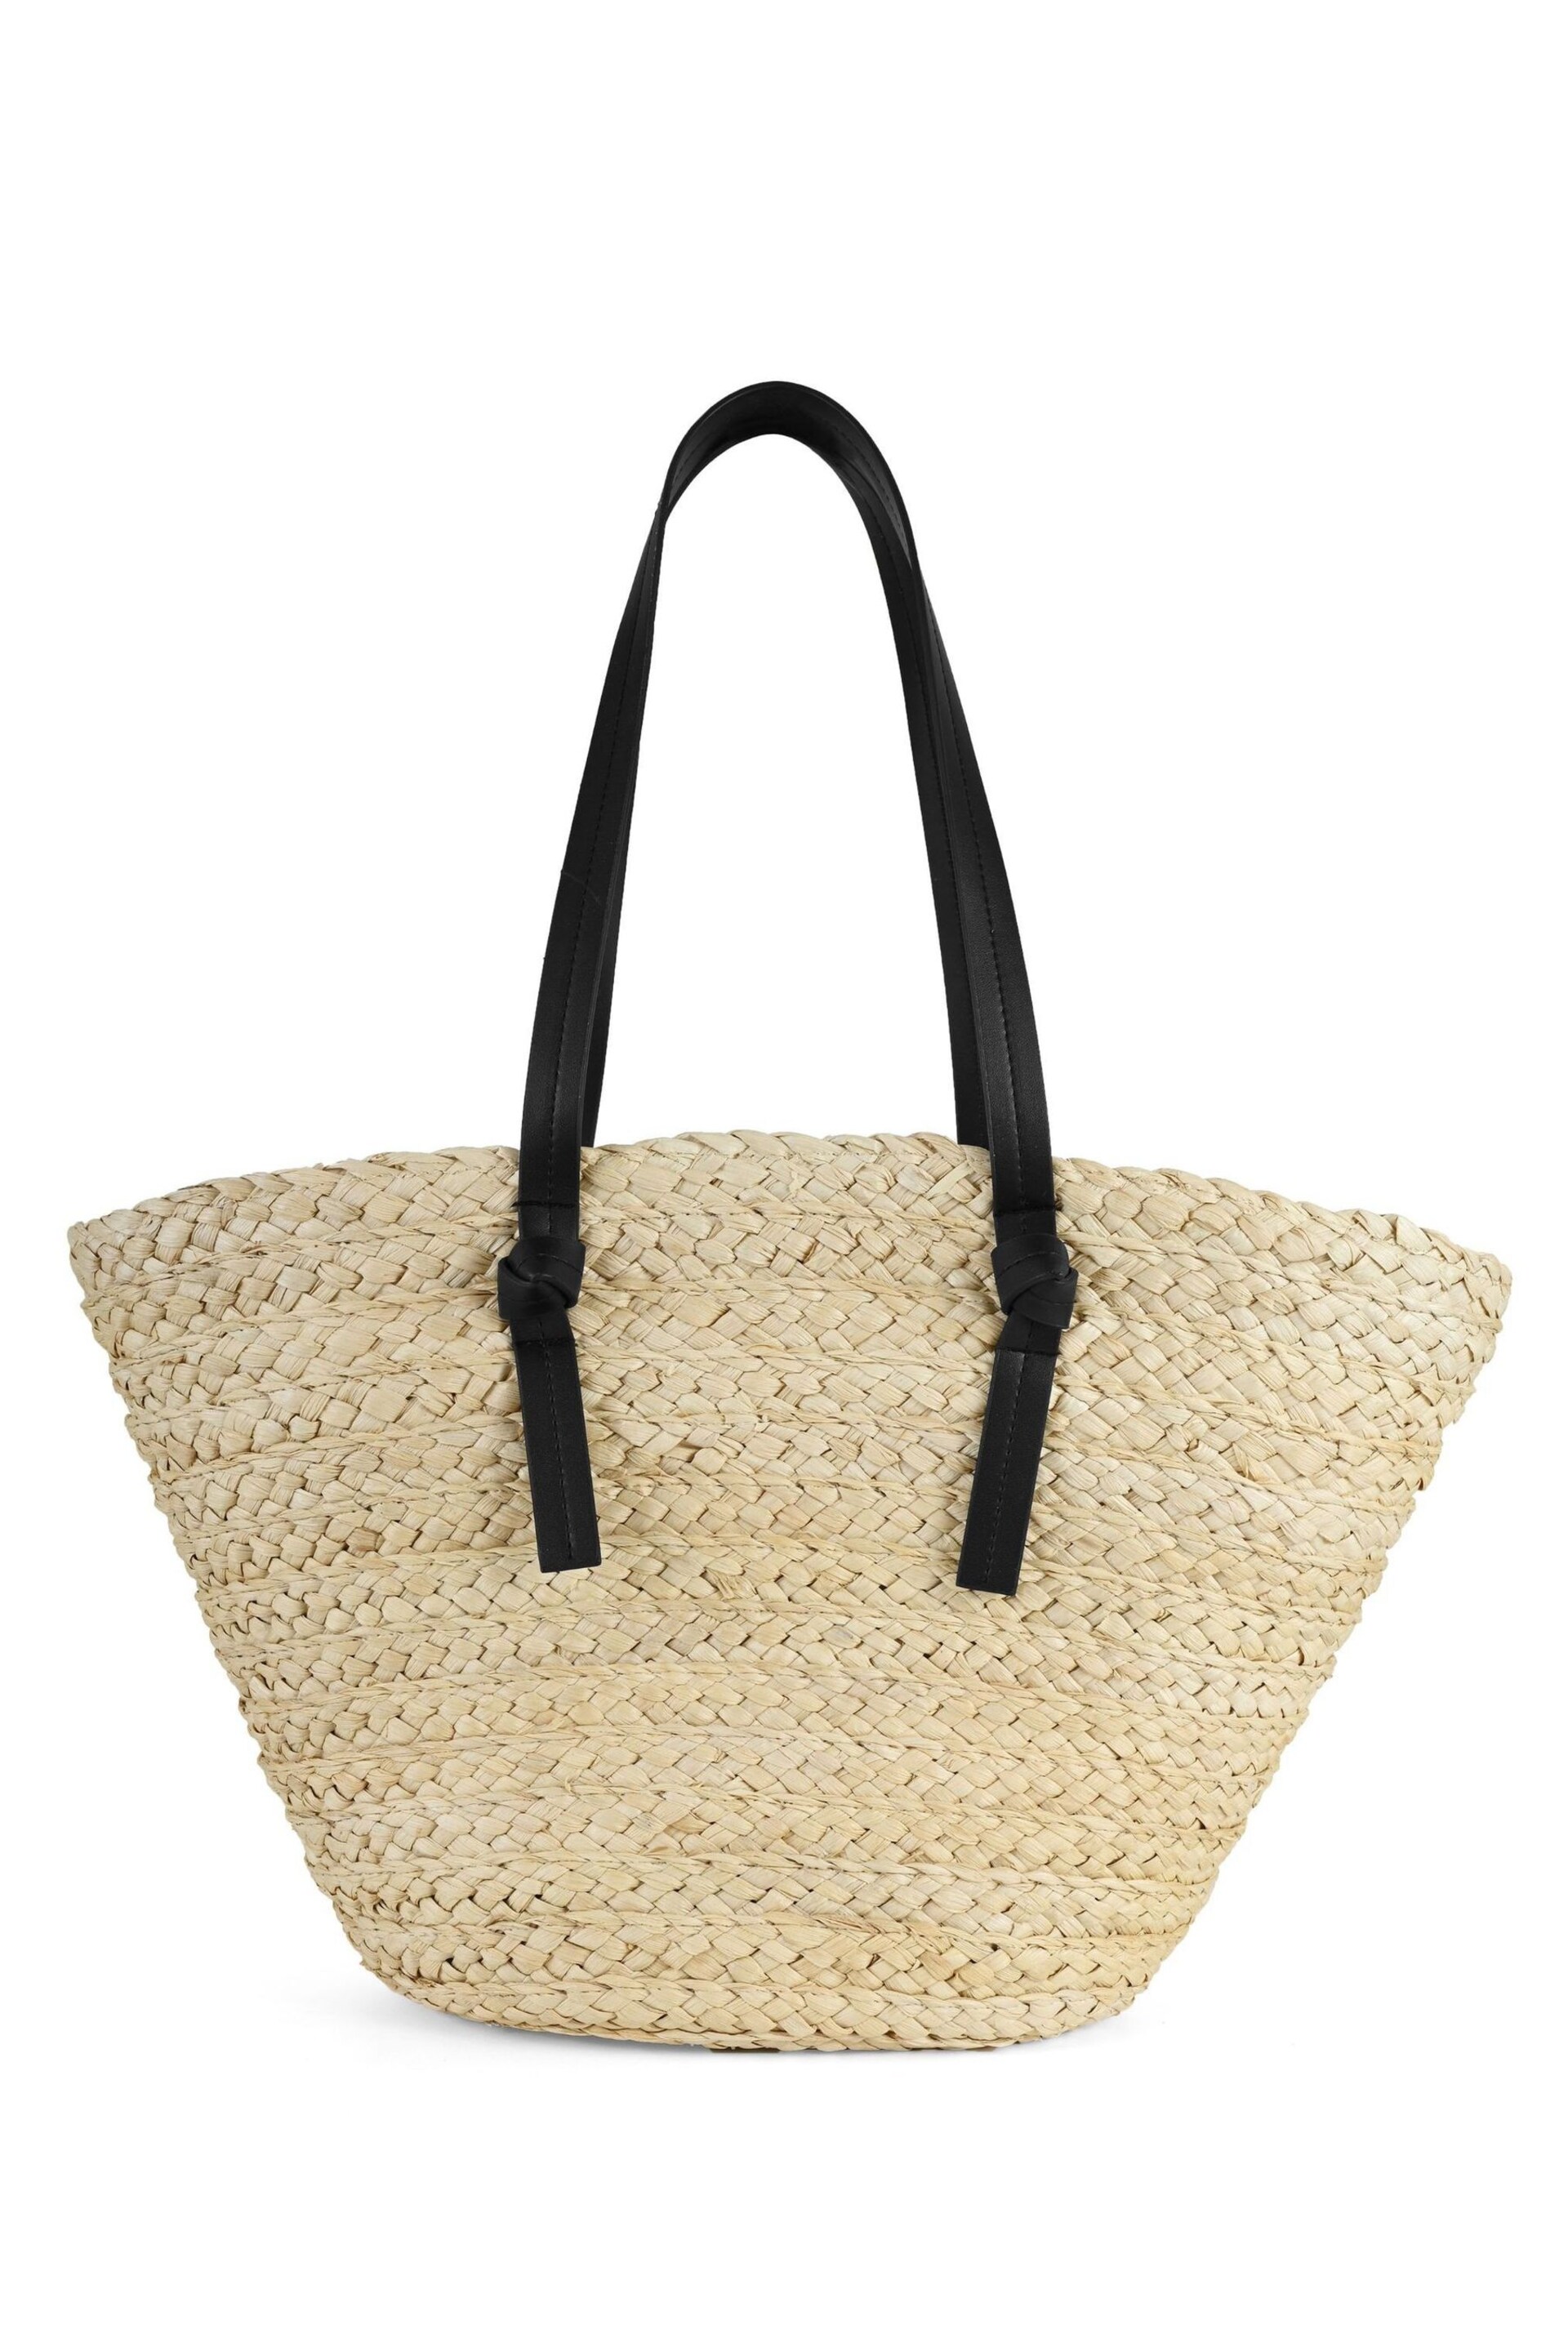 South Beach Brown Shoulder Straw Tote Bag - Image 5 of 5